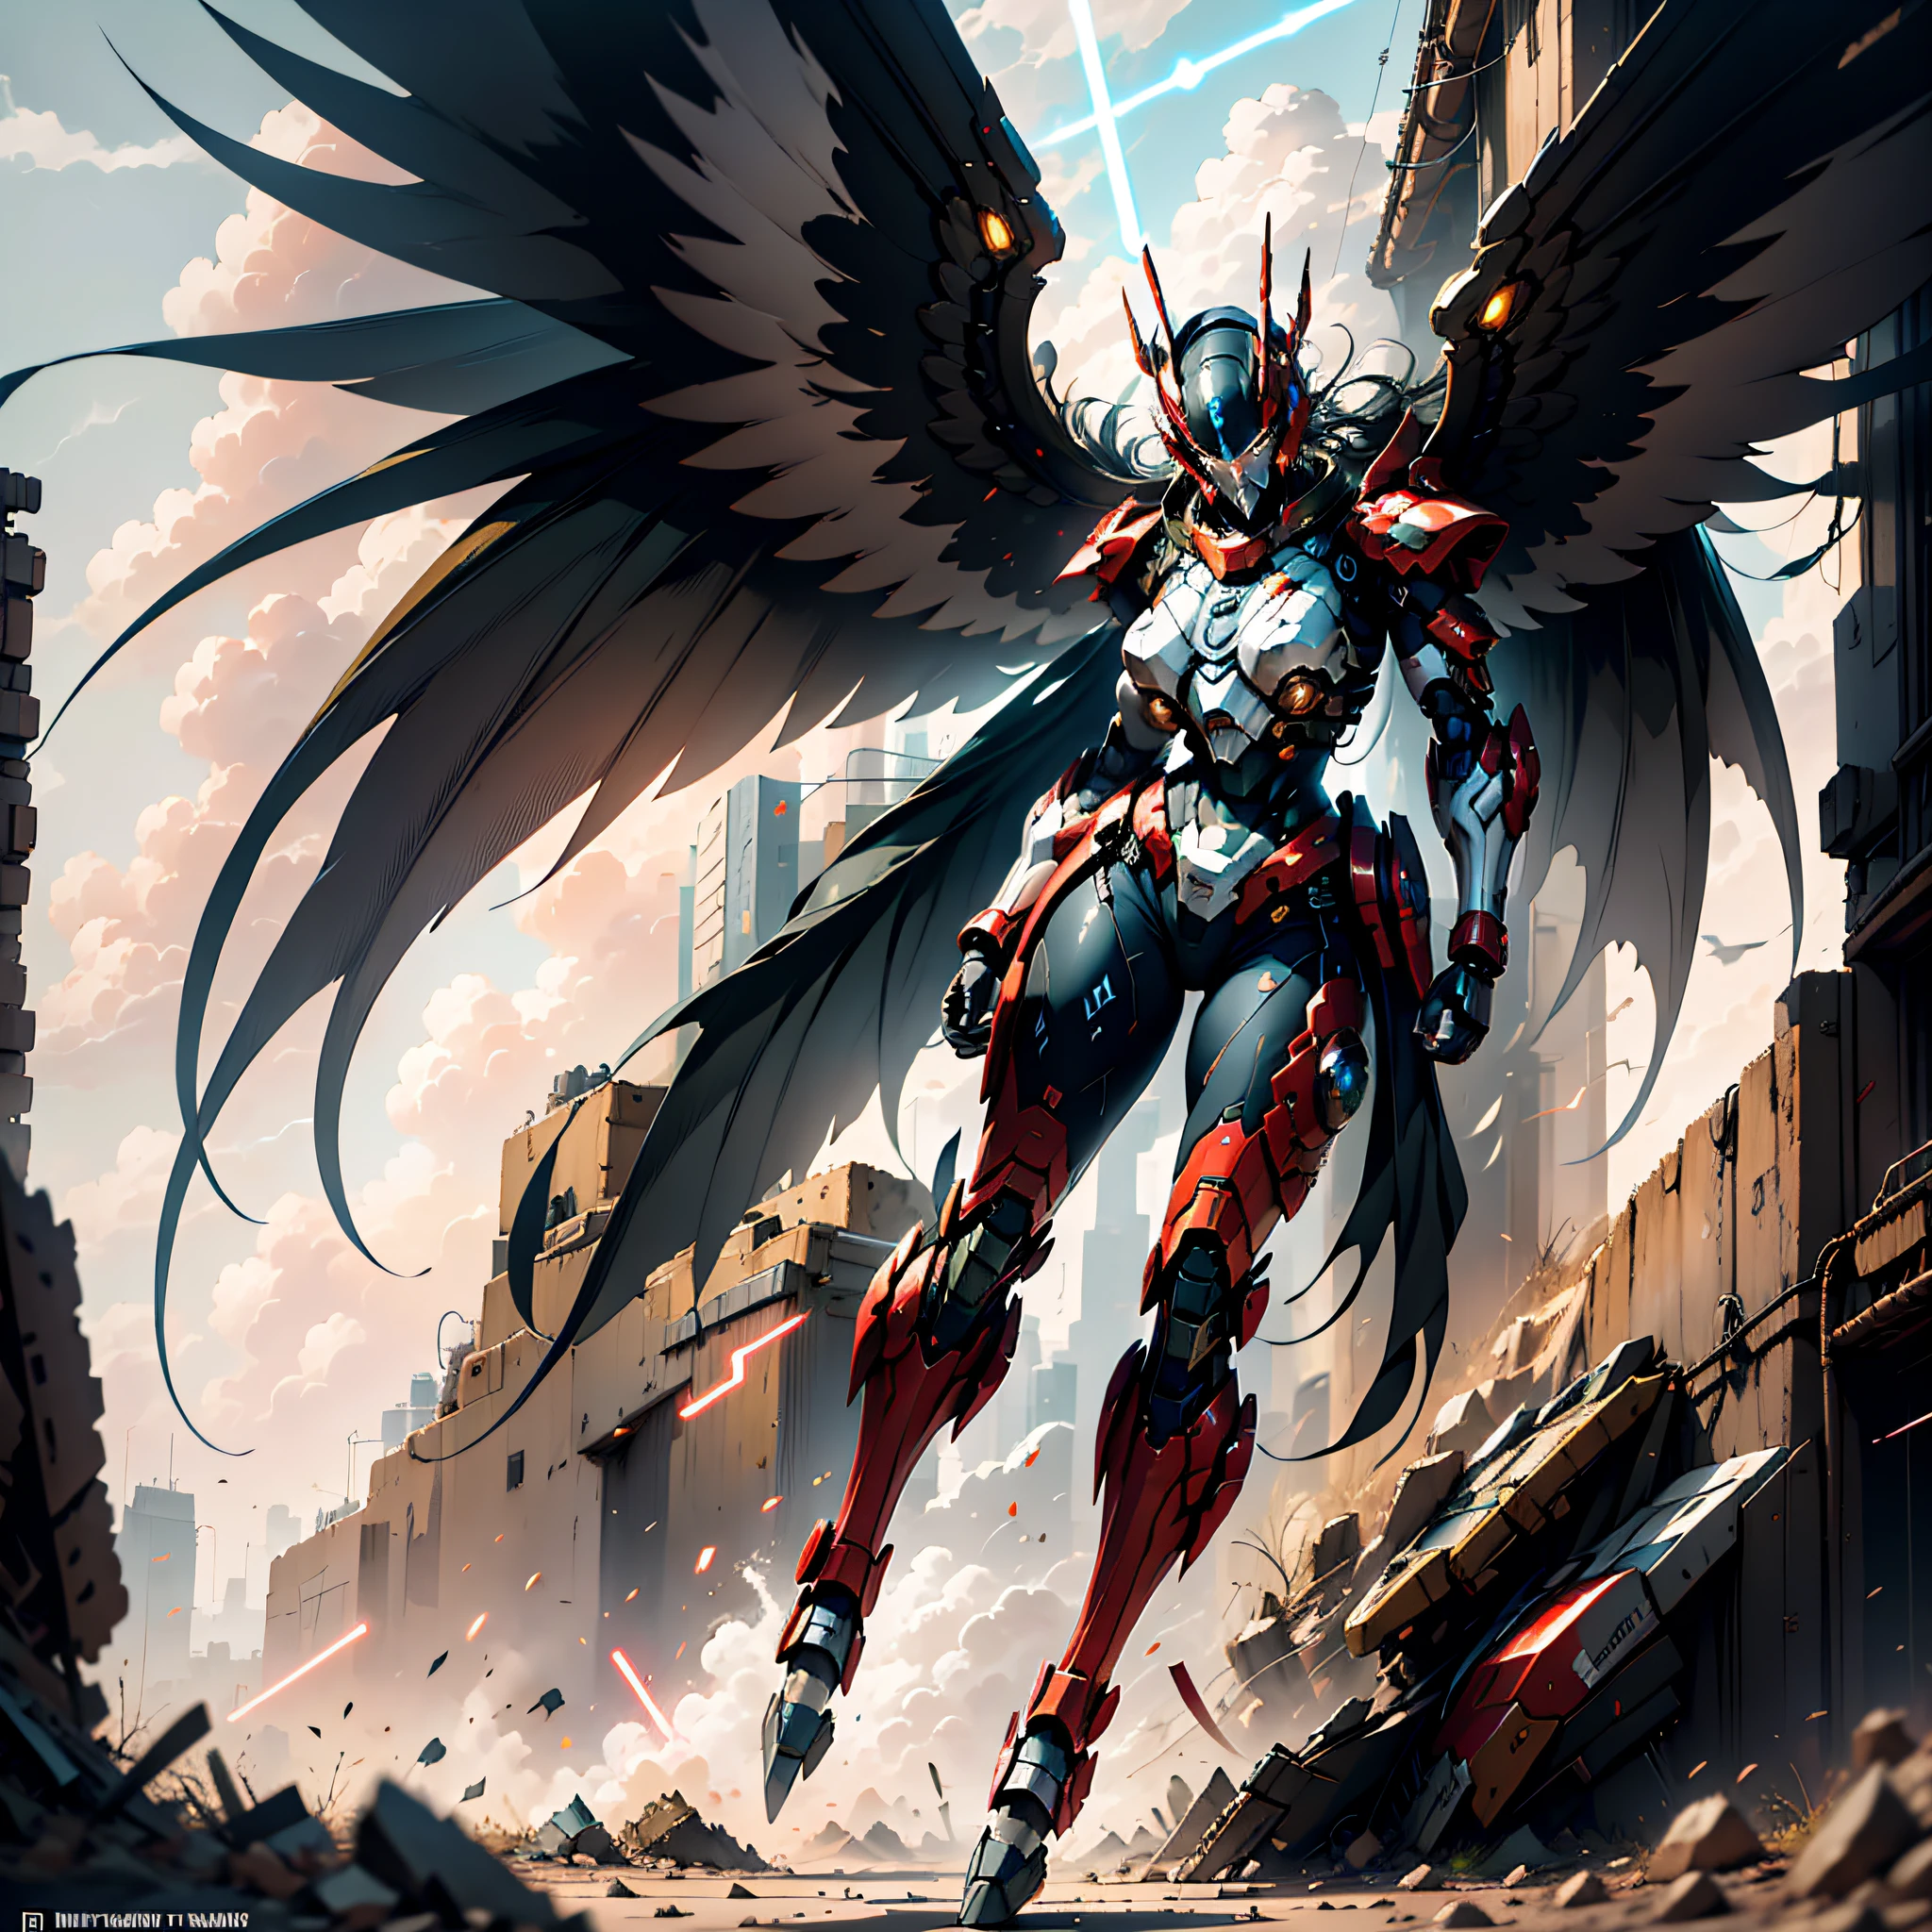 tmasterpiece, The best picture quality, Aerial vistas, Clouds fluttering, holding light saber, Dazzle shines, Mechanical Warrior, Huge city, Dizzying red, Dynamic full body armor, with her wings spread wide, magnificent view, Step by step, Heroes in battle